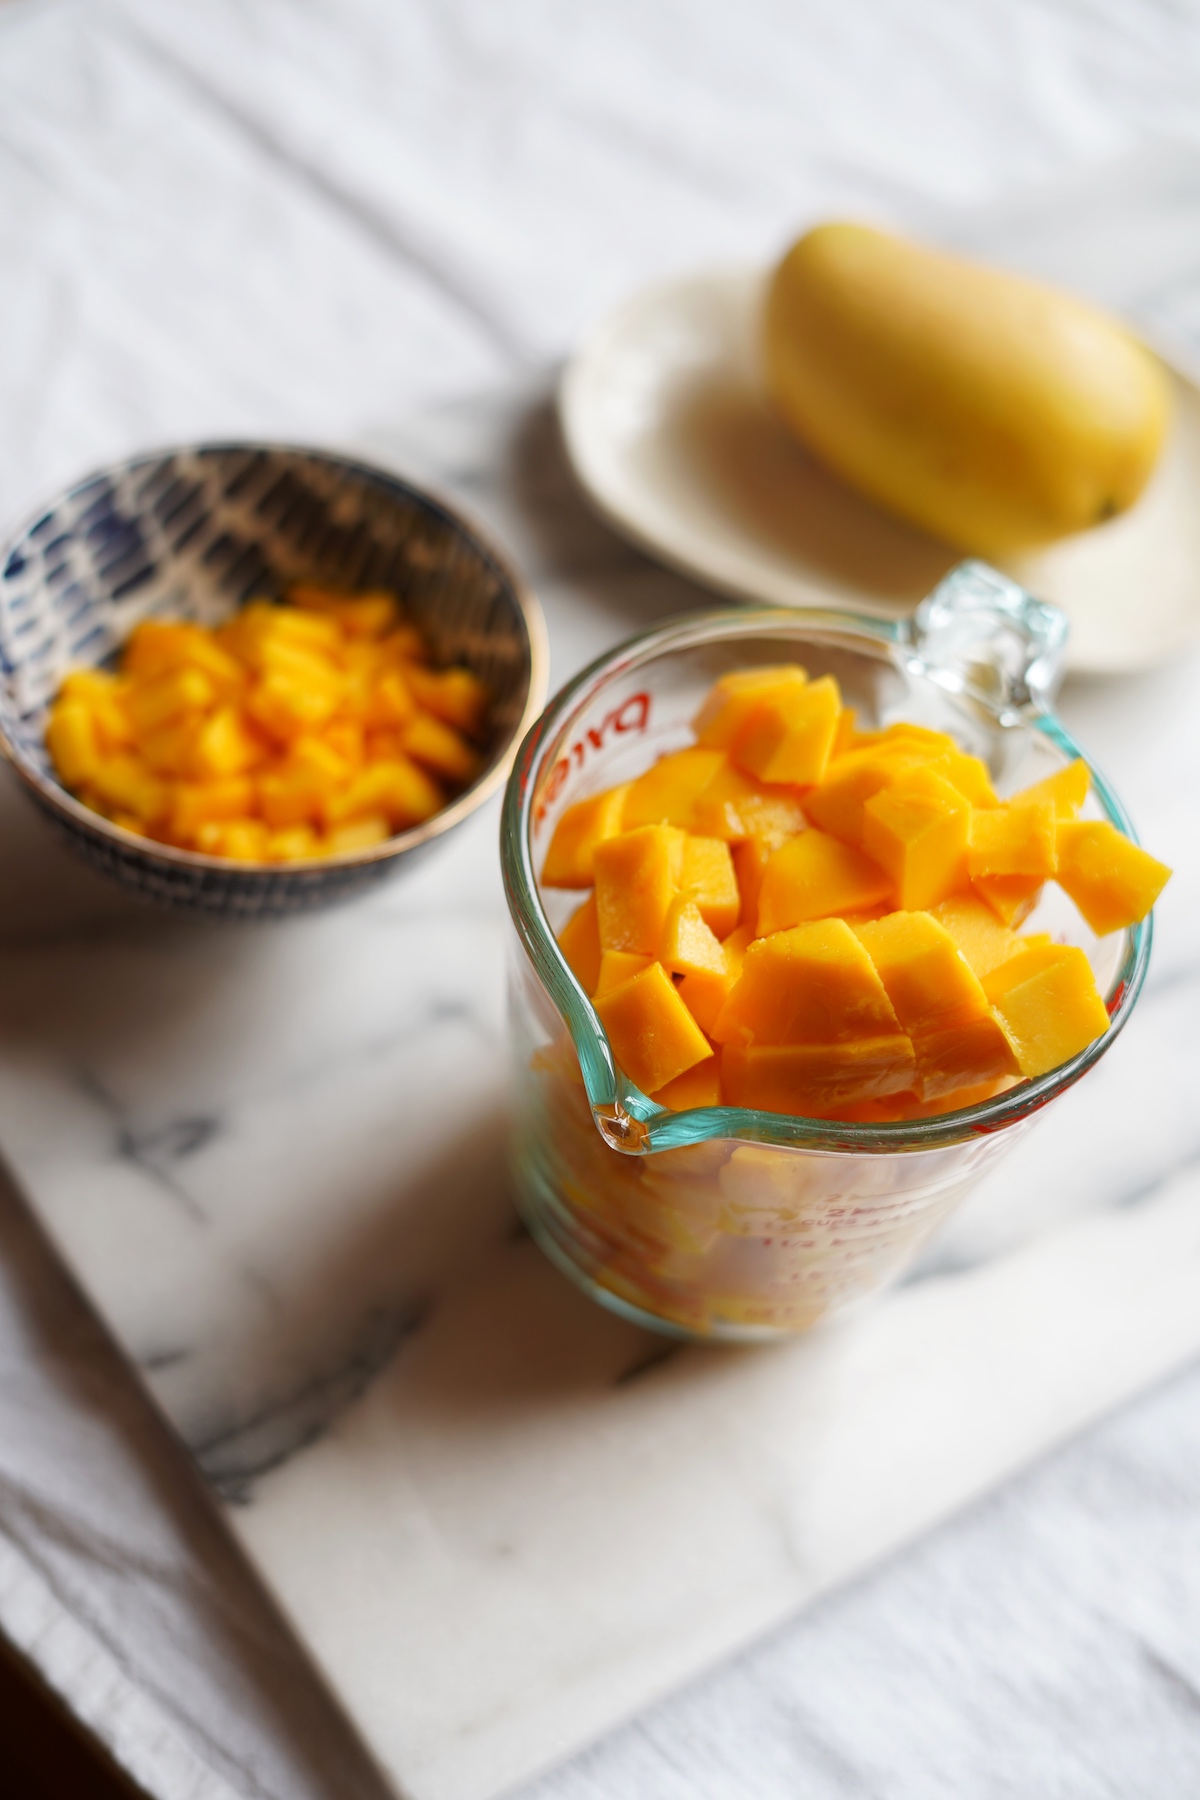 Bowl of cubed mango and another bowl of chopped pieces of mango.